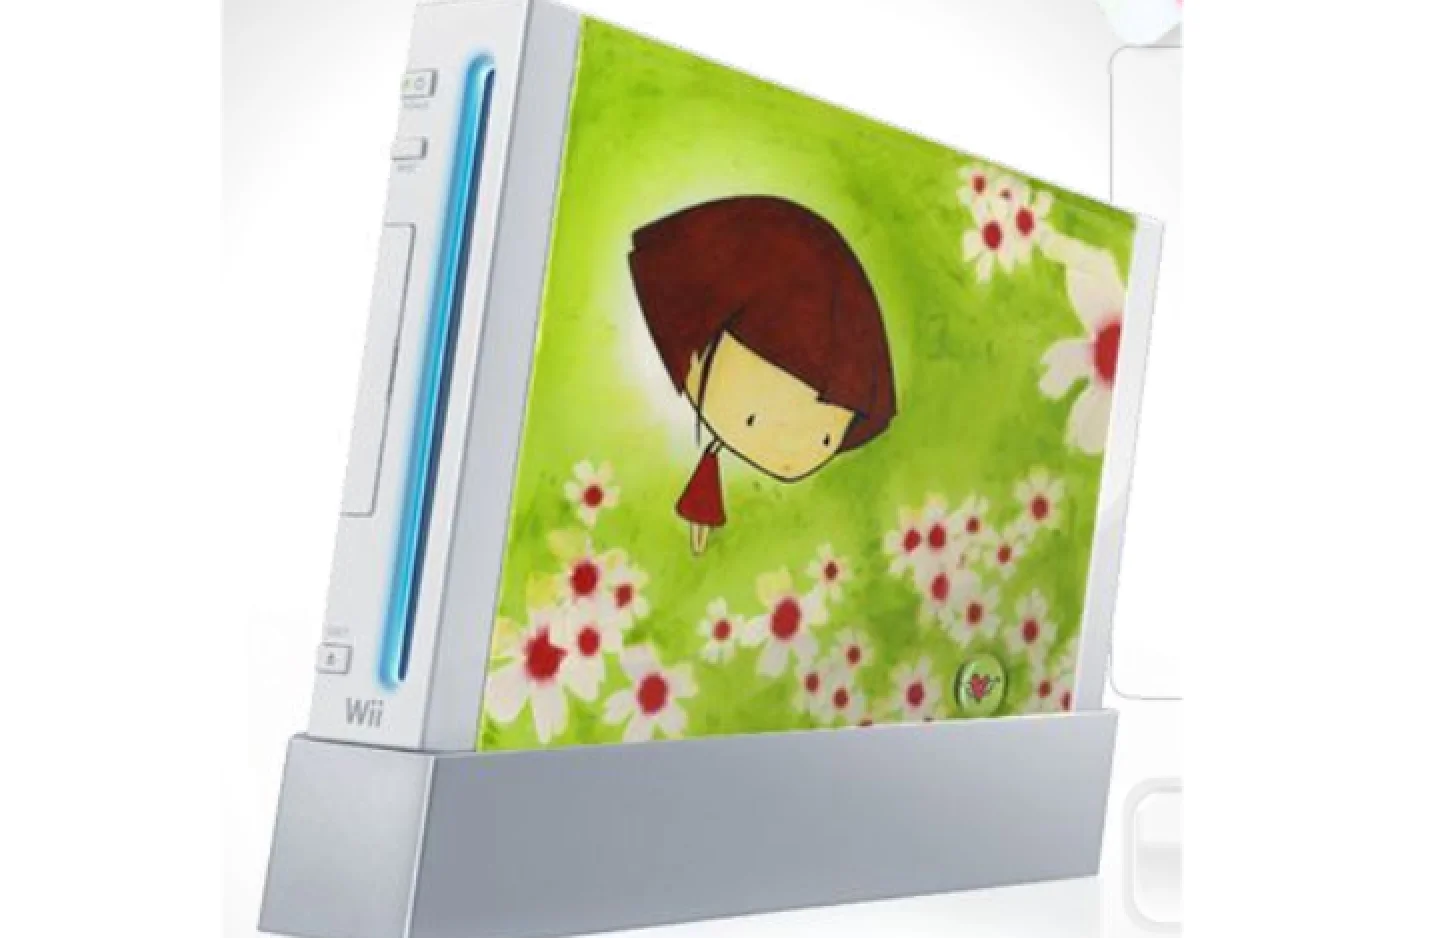  Nintendo Wii The Art of Wii Hoi-An Tang Console